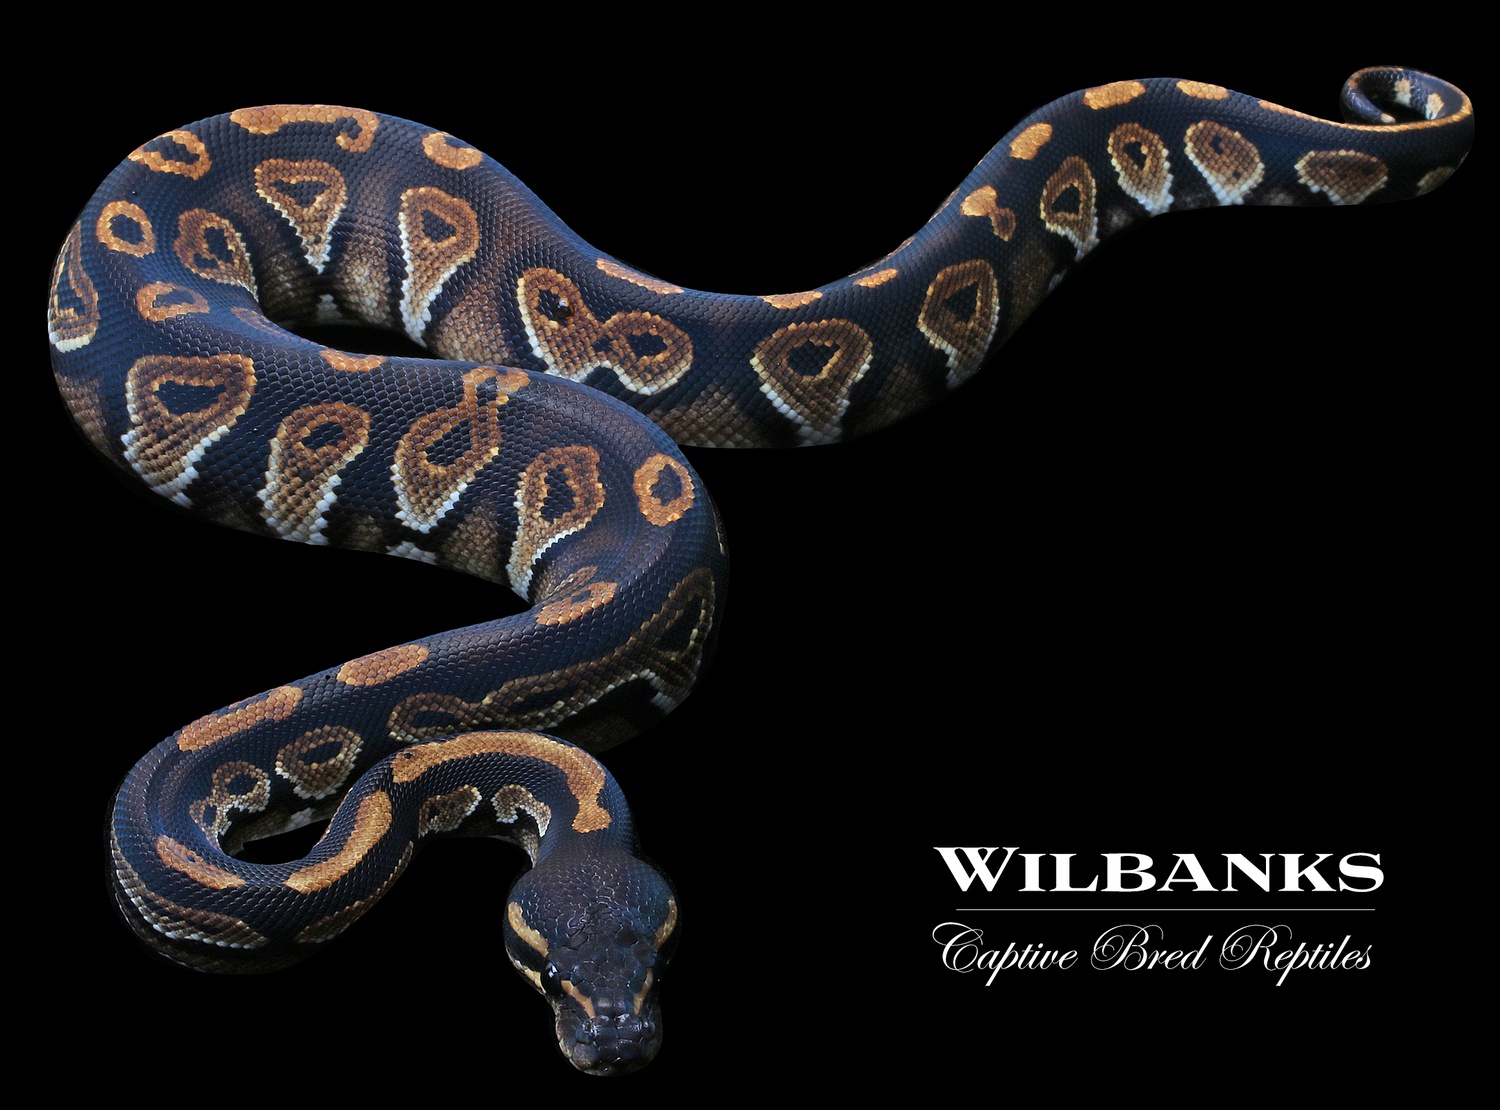 Blackhead Ball Python by Wilbanks Captive Bred Reptiles